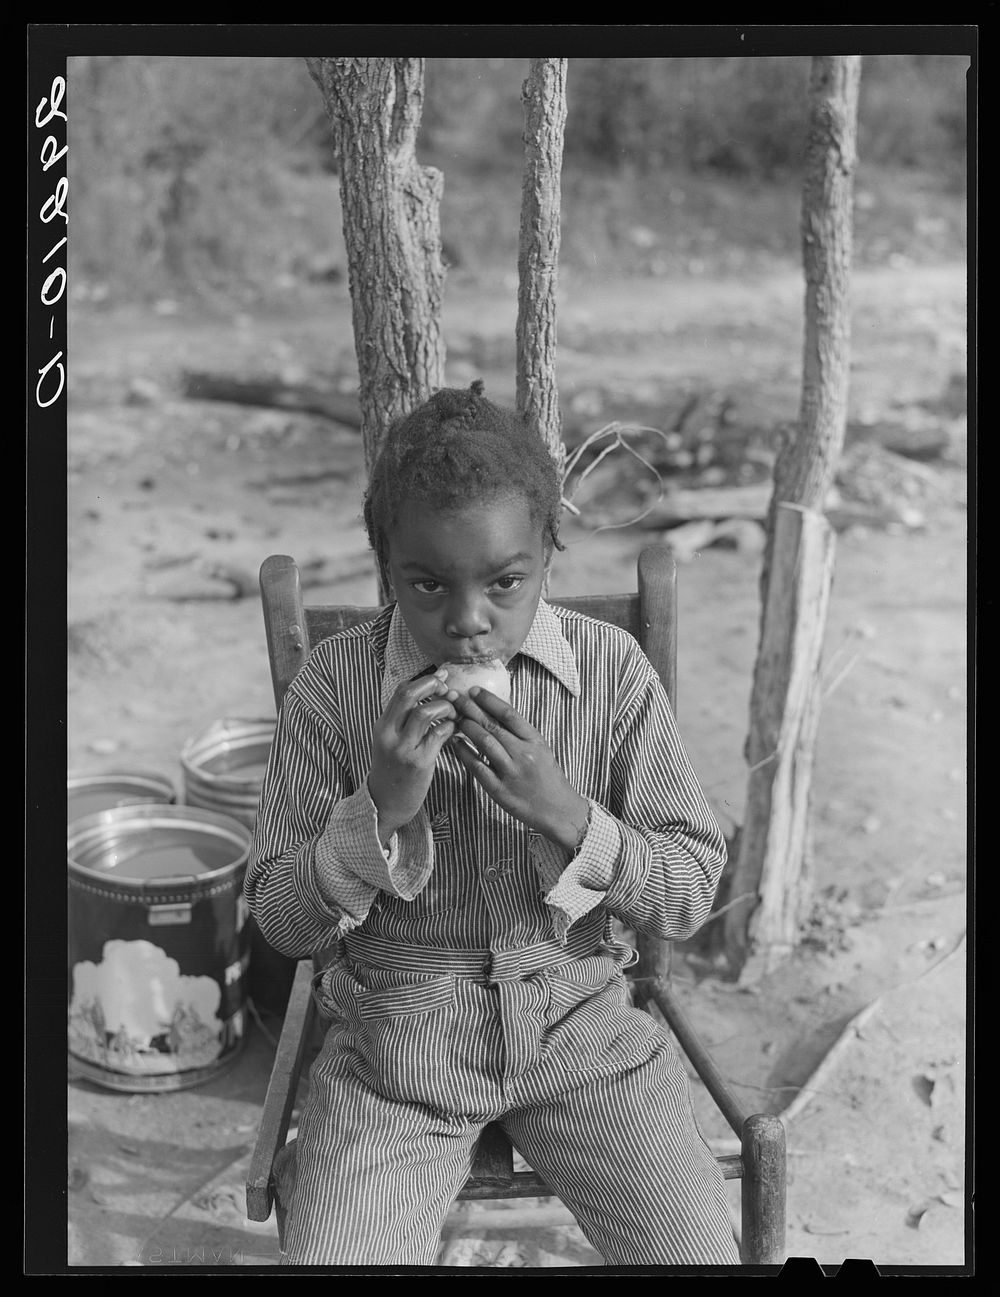 Evicted sharecropper's child eating orange from F.S.C.C supply. Butler County, Missouri. Sourced from the Library of…